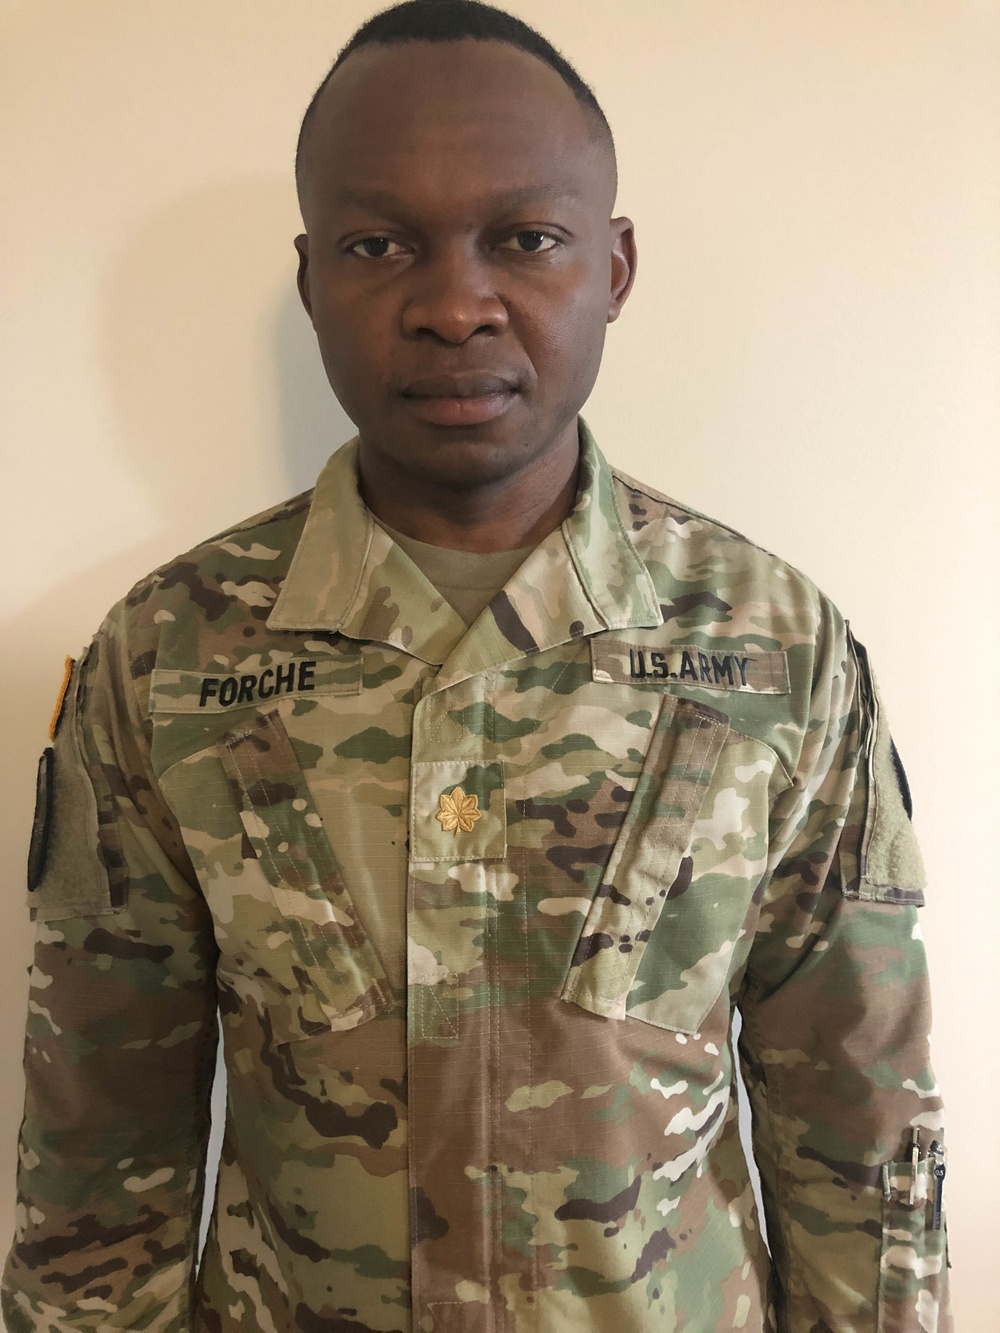 AMCOM Veteran spotlight: Former Cameroon citizen now serves as U.S. Army commissioned officer